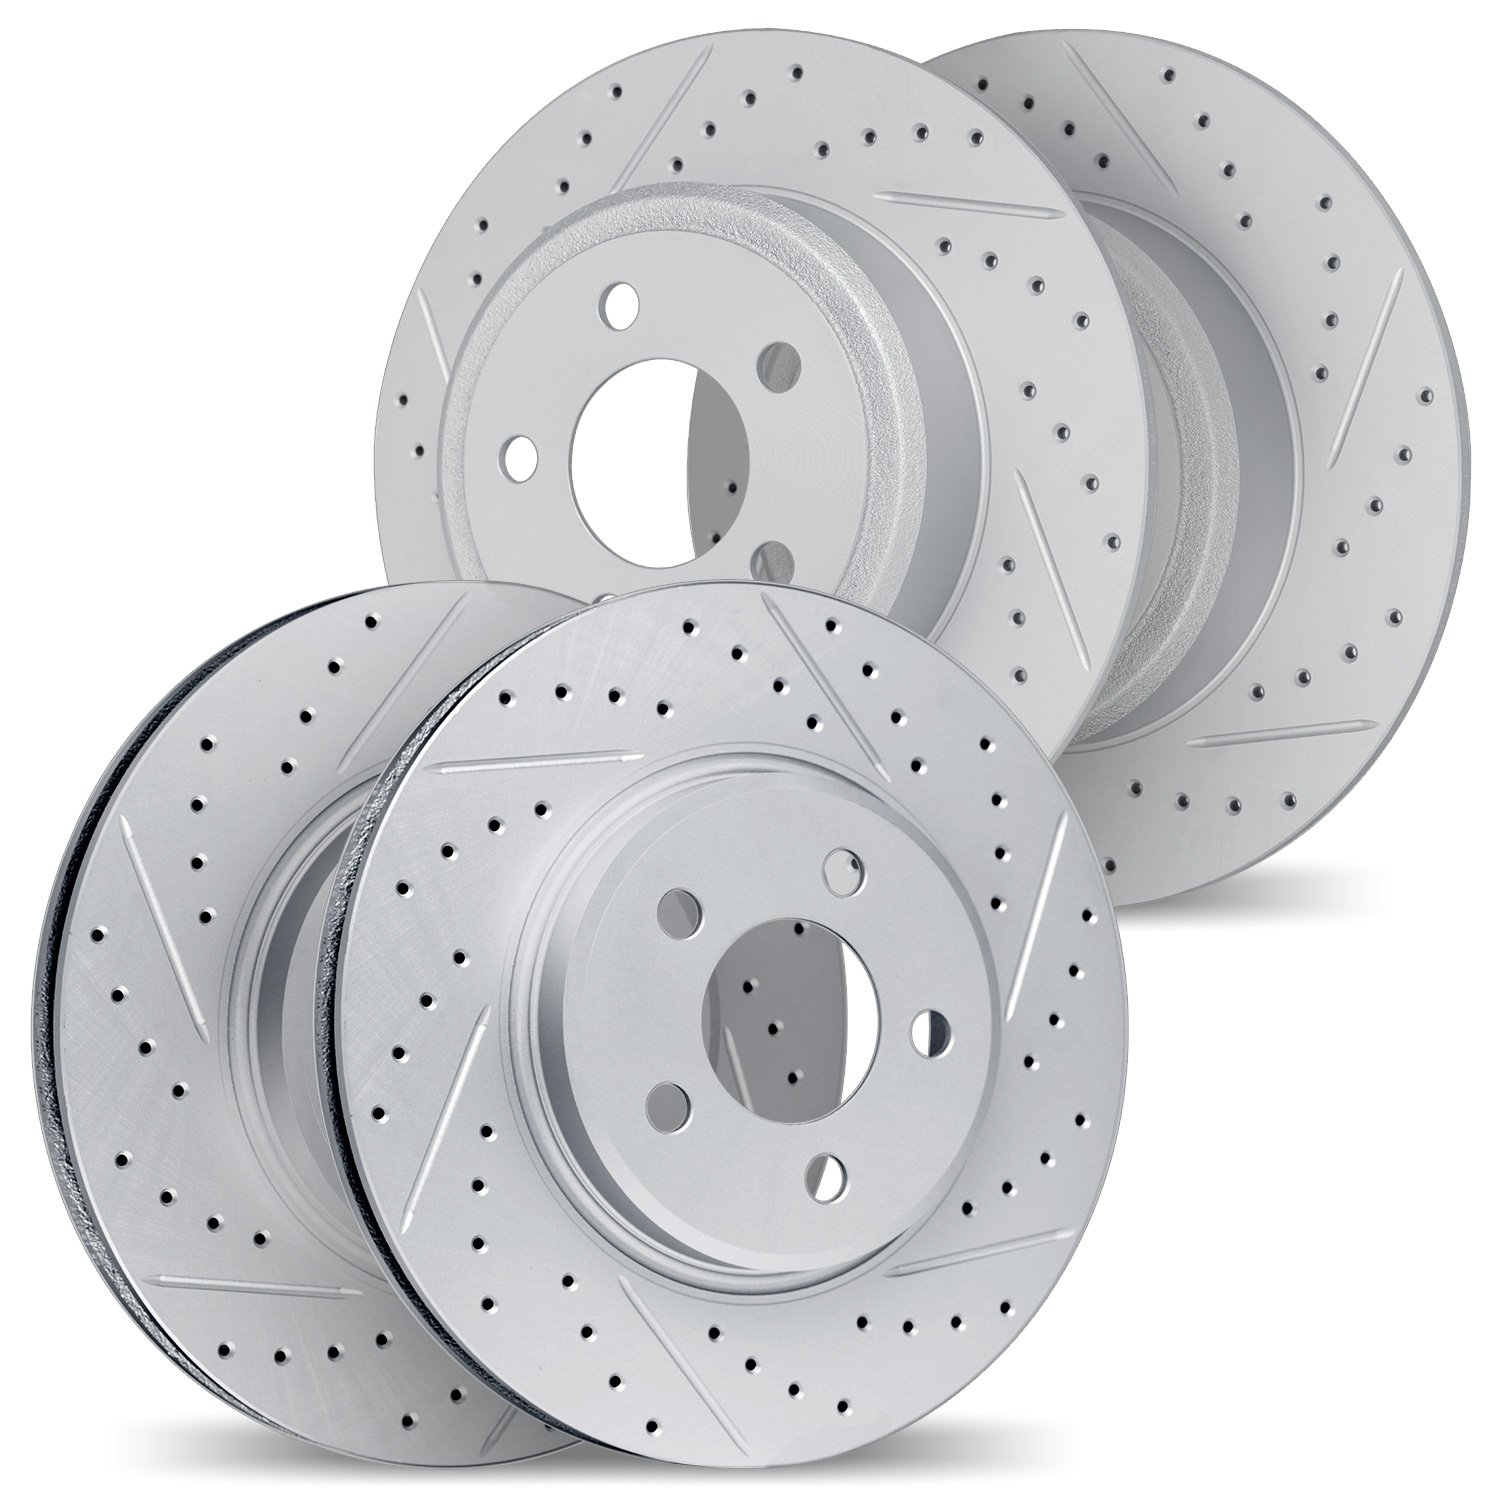 2004-27012 Geoperformance Drilled/Slotted Brake Rotors, 1999-2009 Volvo, Position: Front and Rear